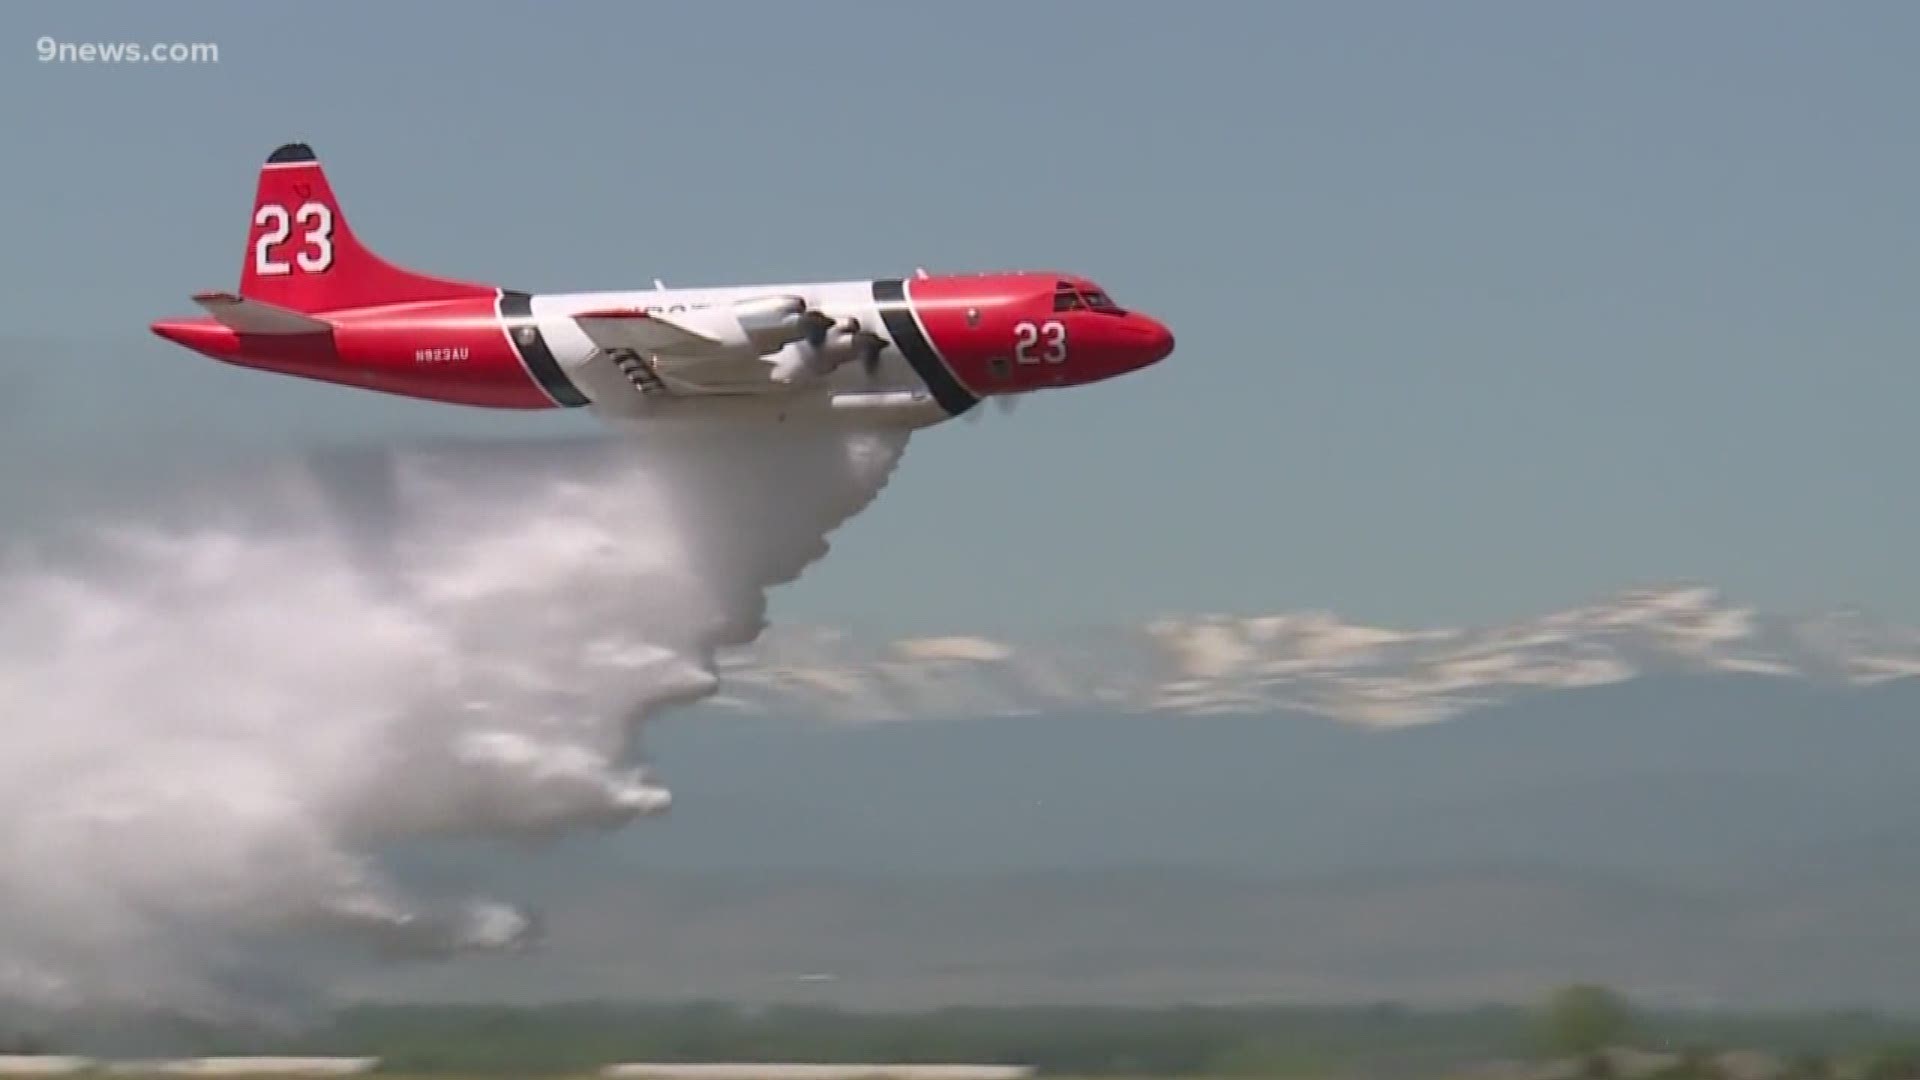 There's a big arsenal of aircraft available, but this year there will be a new plane in the sky when wildfires appear. We got a preview of the new tanker during a special test flight.